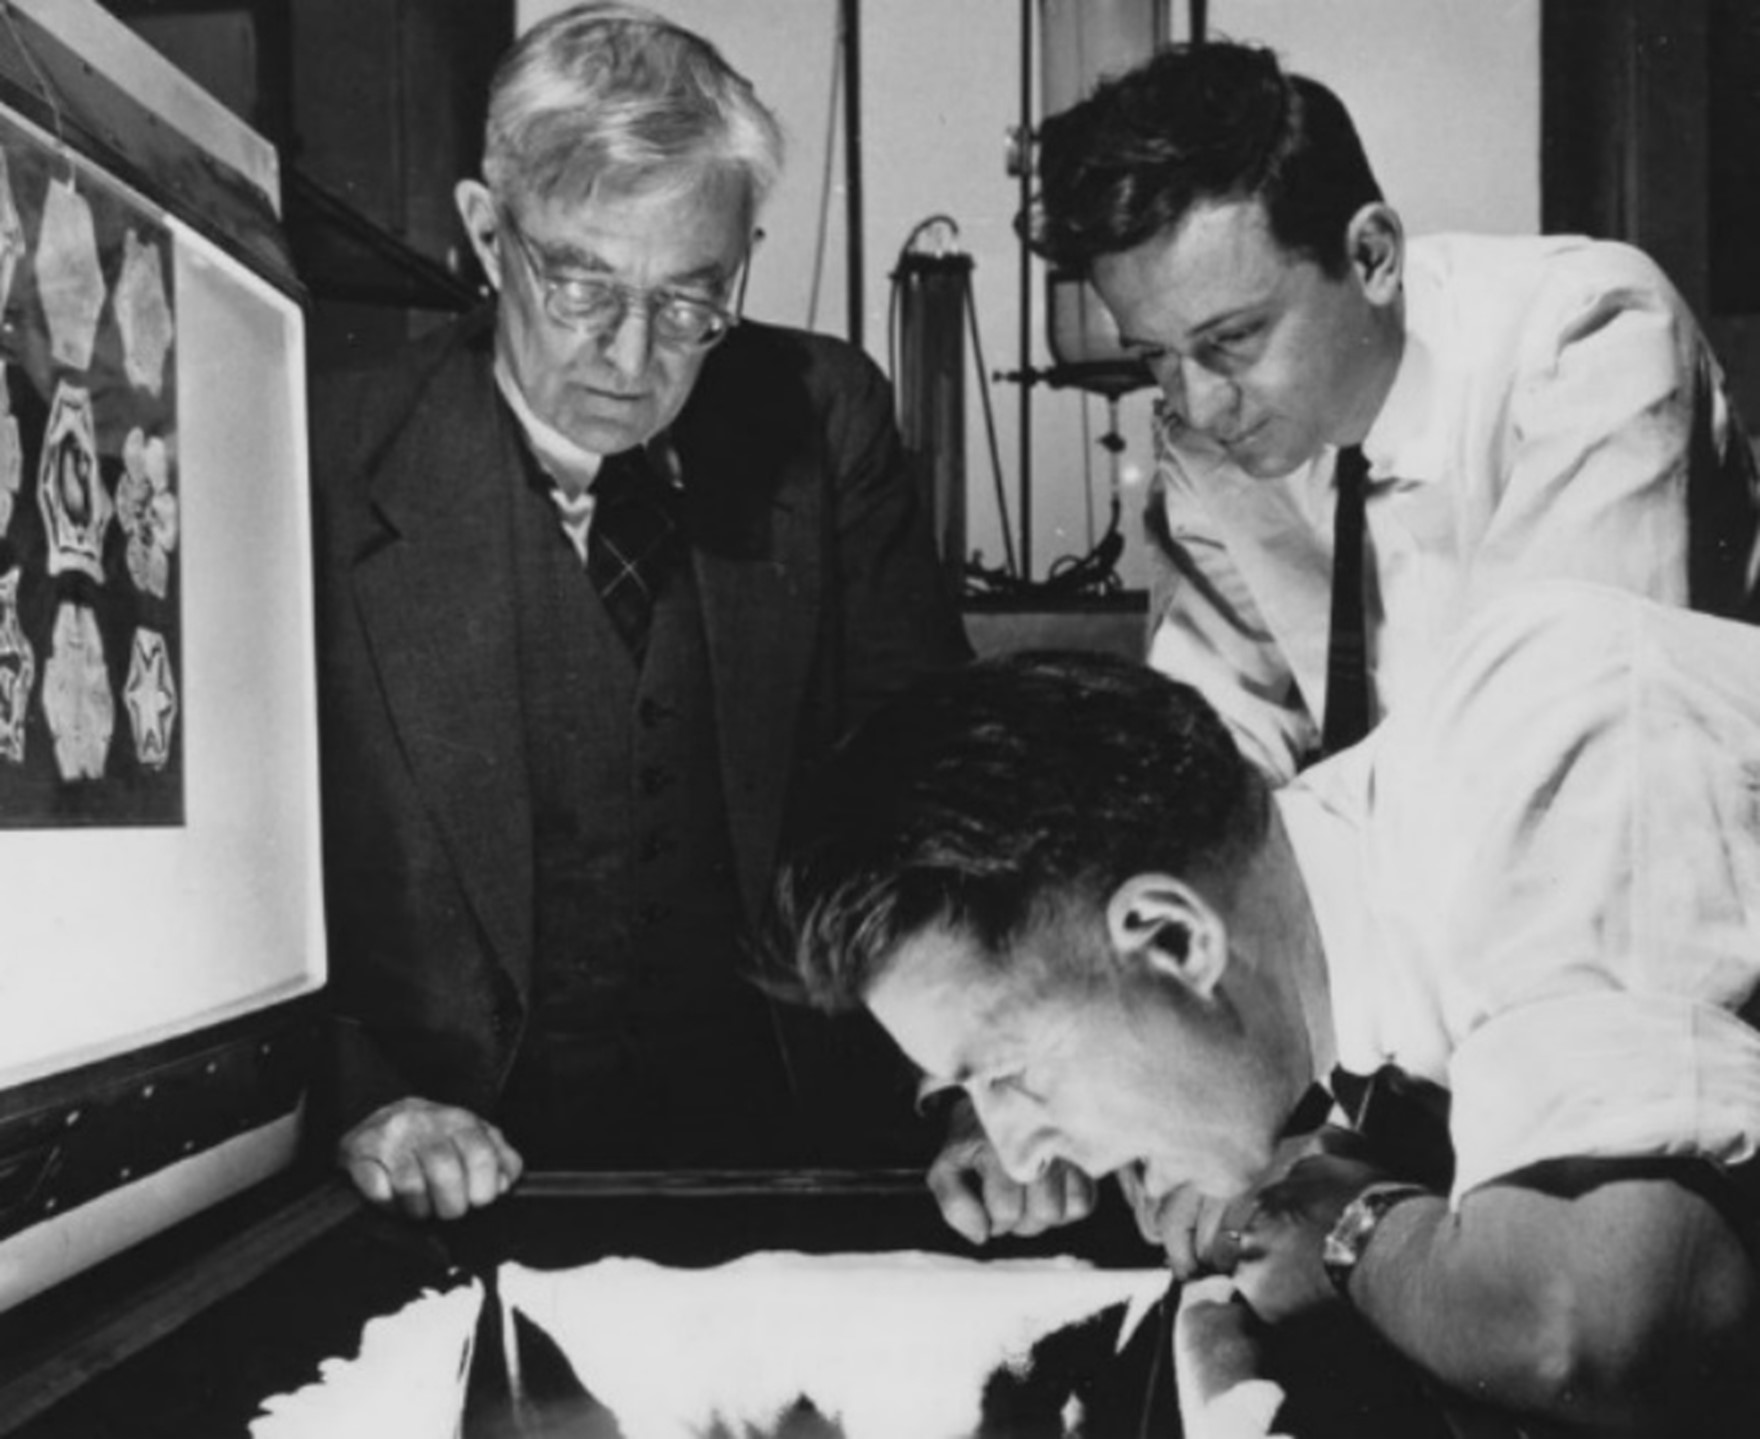 Bernard Vonnegut, middle right, was an inspiration to Paul DeMott, who knew the senior scientist as an undergraduate at the State University of New York at Albany. Here, Vonnegut is in his days at General Electric, where he experimented on snow-making materials. At top left is Nobel Prize winner Irving Langmuir. At bottom right is General Electric scientist Vincent Schaefer, creating ice particles by blowing his breath into a freezer.